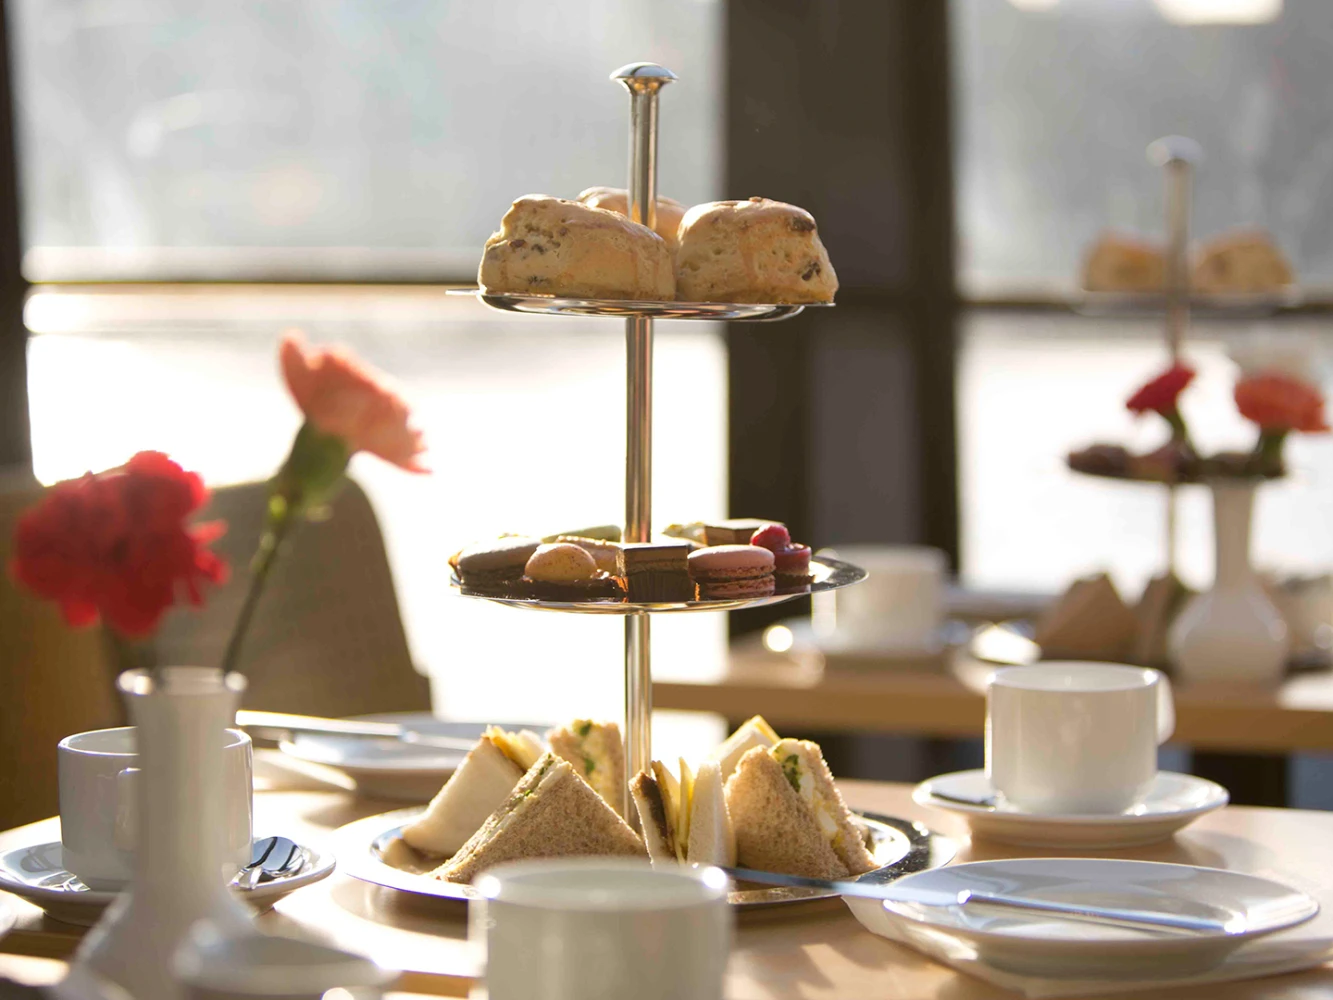 City Cruises - Afternoon Tea on the River Thames: What to expect - 3